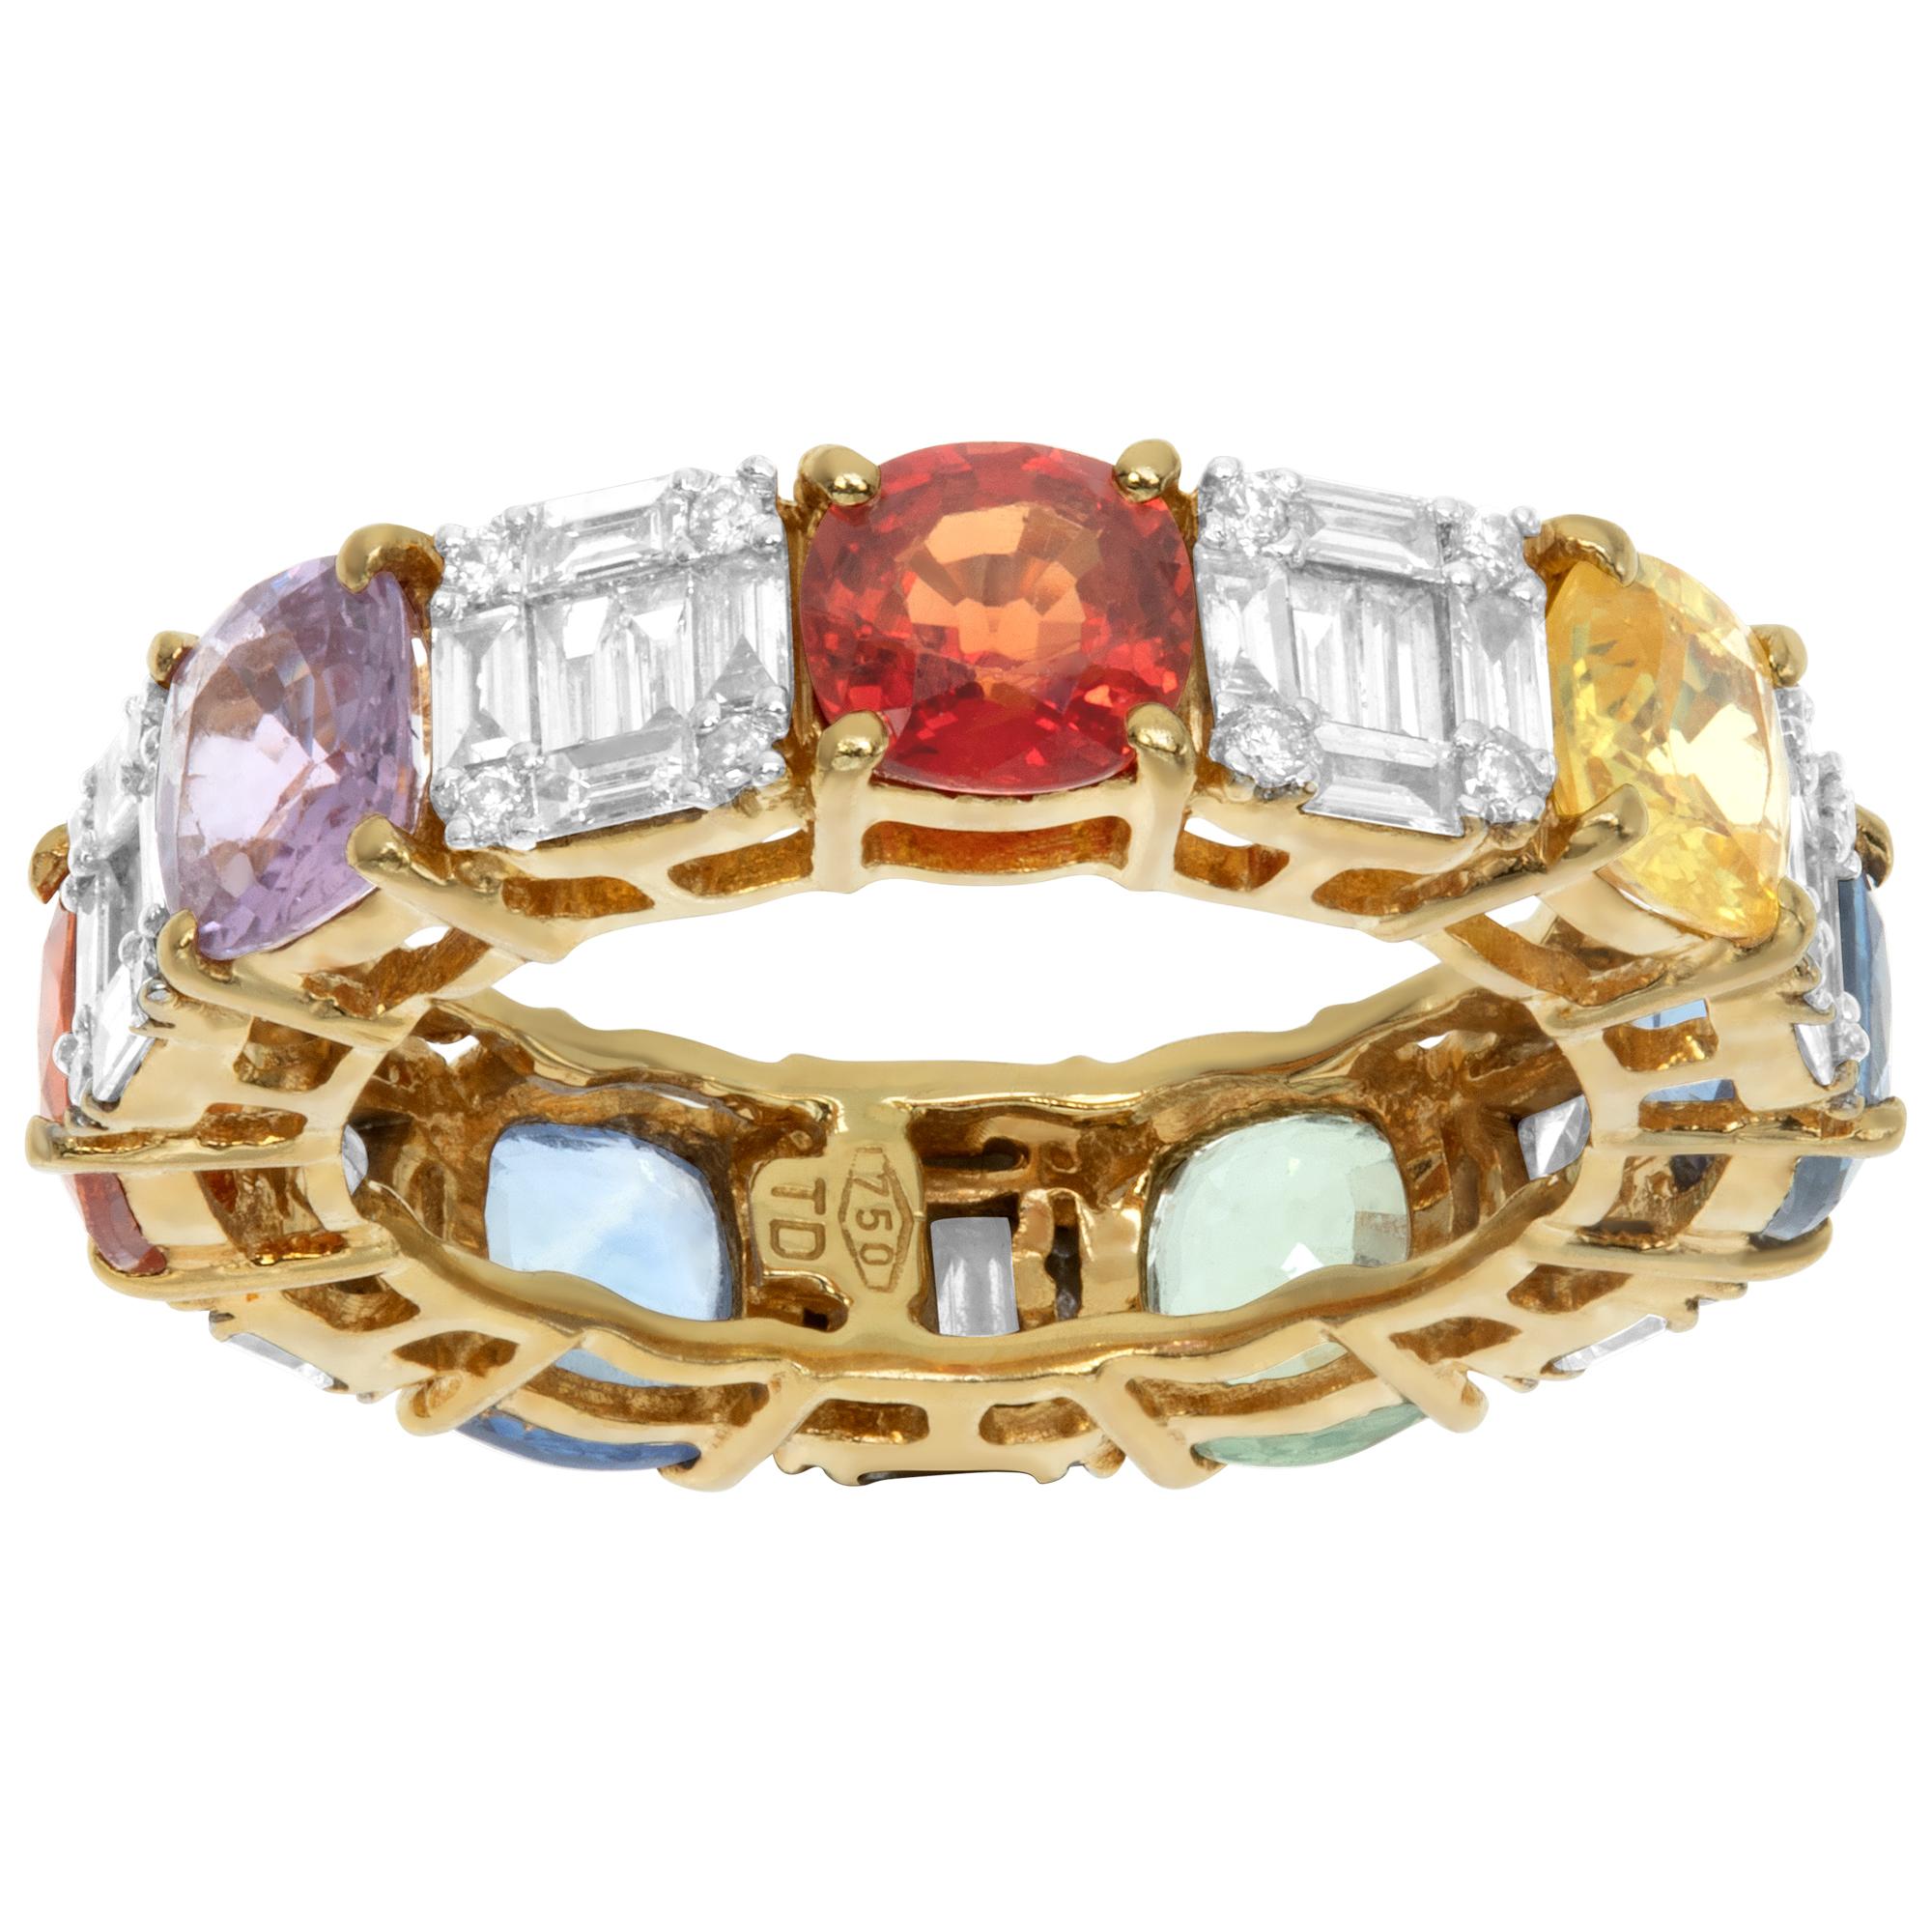 Multi-colored sapphires eternity band with mosaic of 6 baguette and 4 round diamonds 7 stations of G-H color, VS clarity diamonds total of approximately 1.40 carats. 18k. Size 5.25This Diamond/Sapphire/Ruby ring is currently size 5.25 and some items